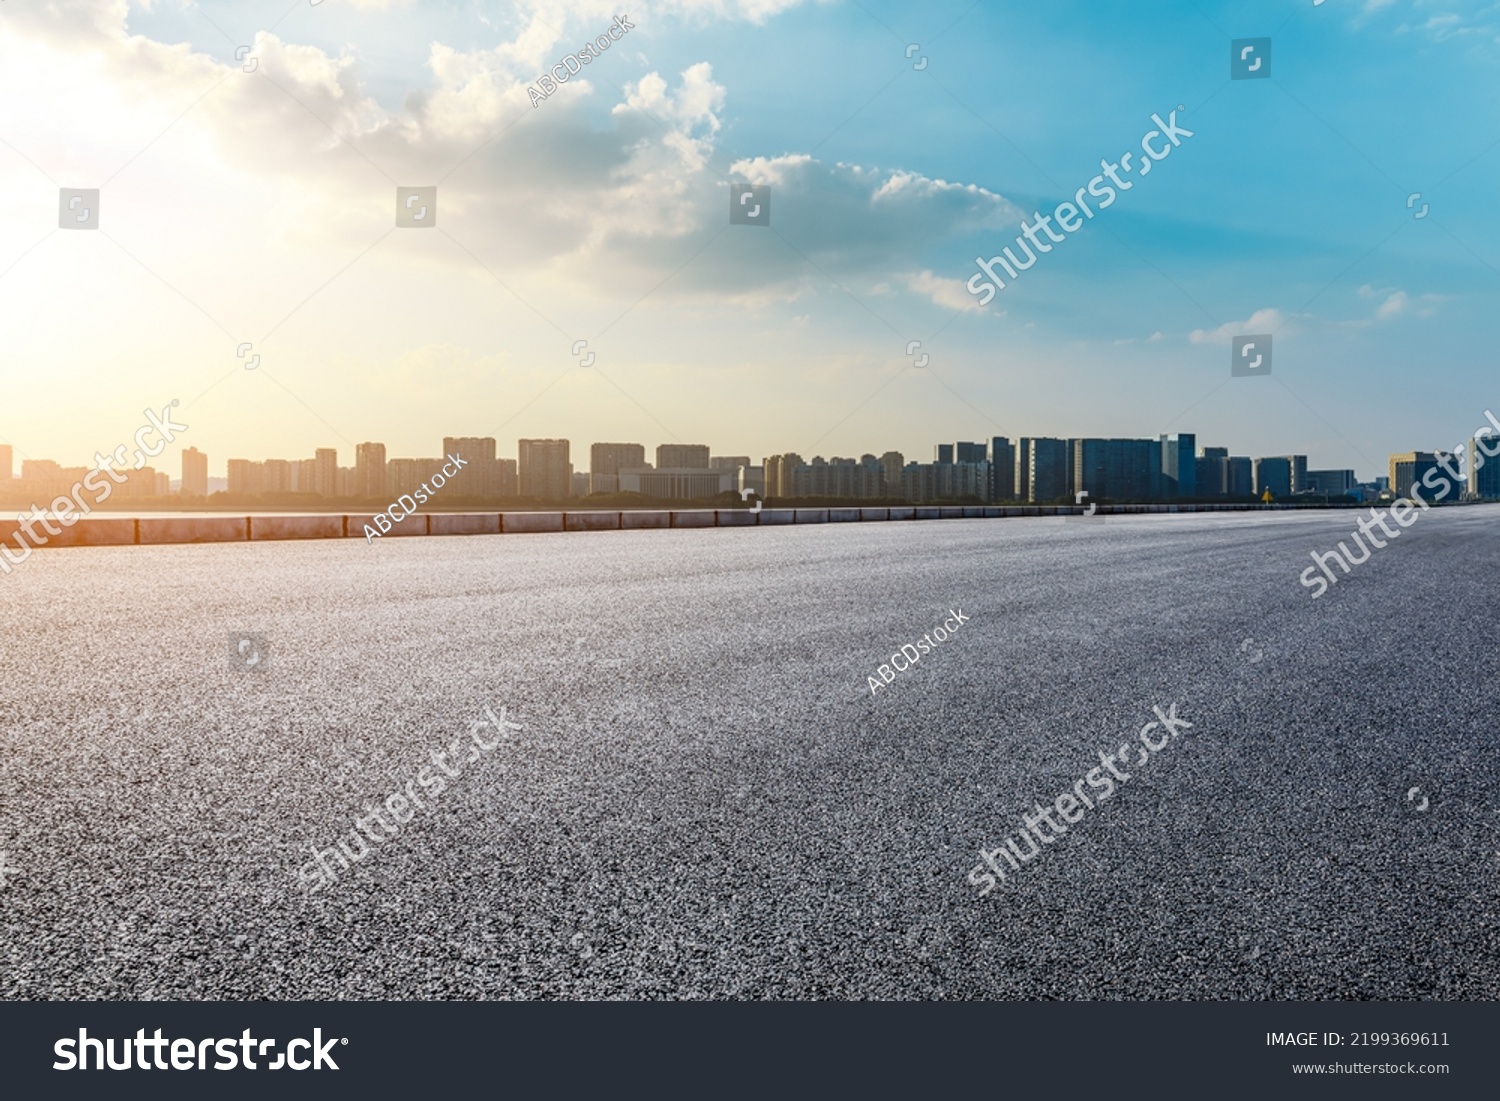 Asphalt road and modern city skyline with buildings scenery at sunset #2199369611